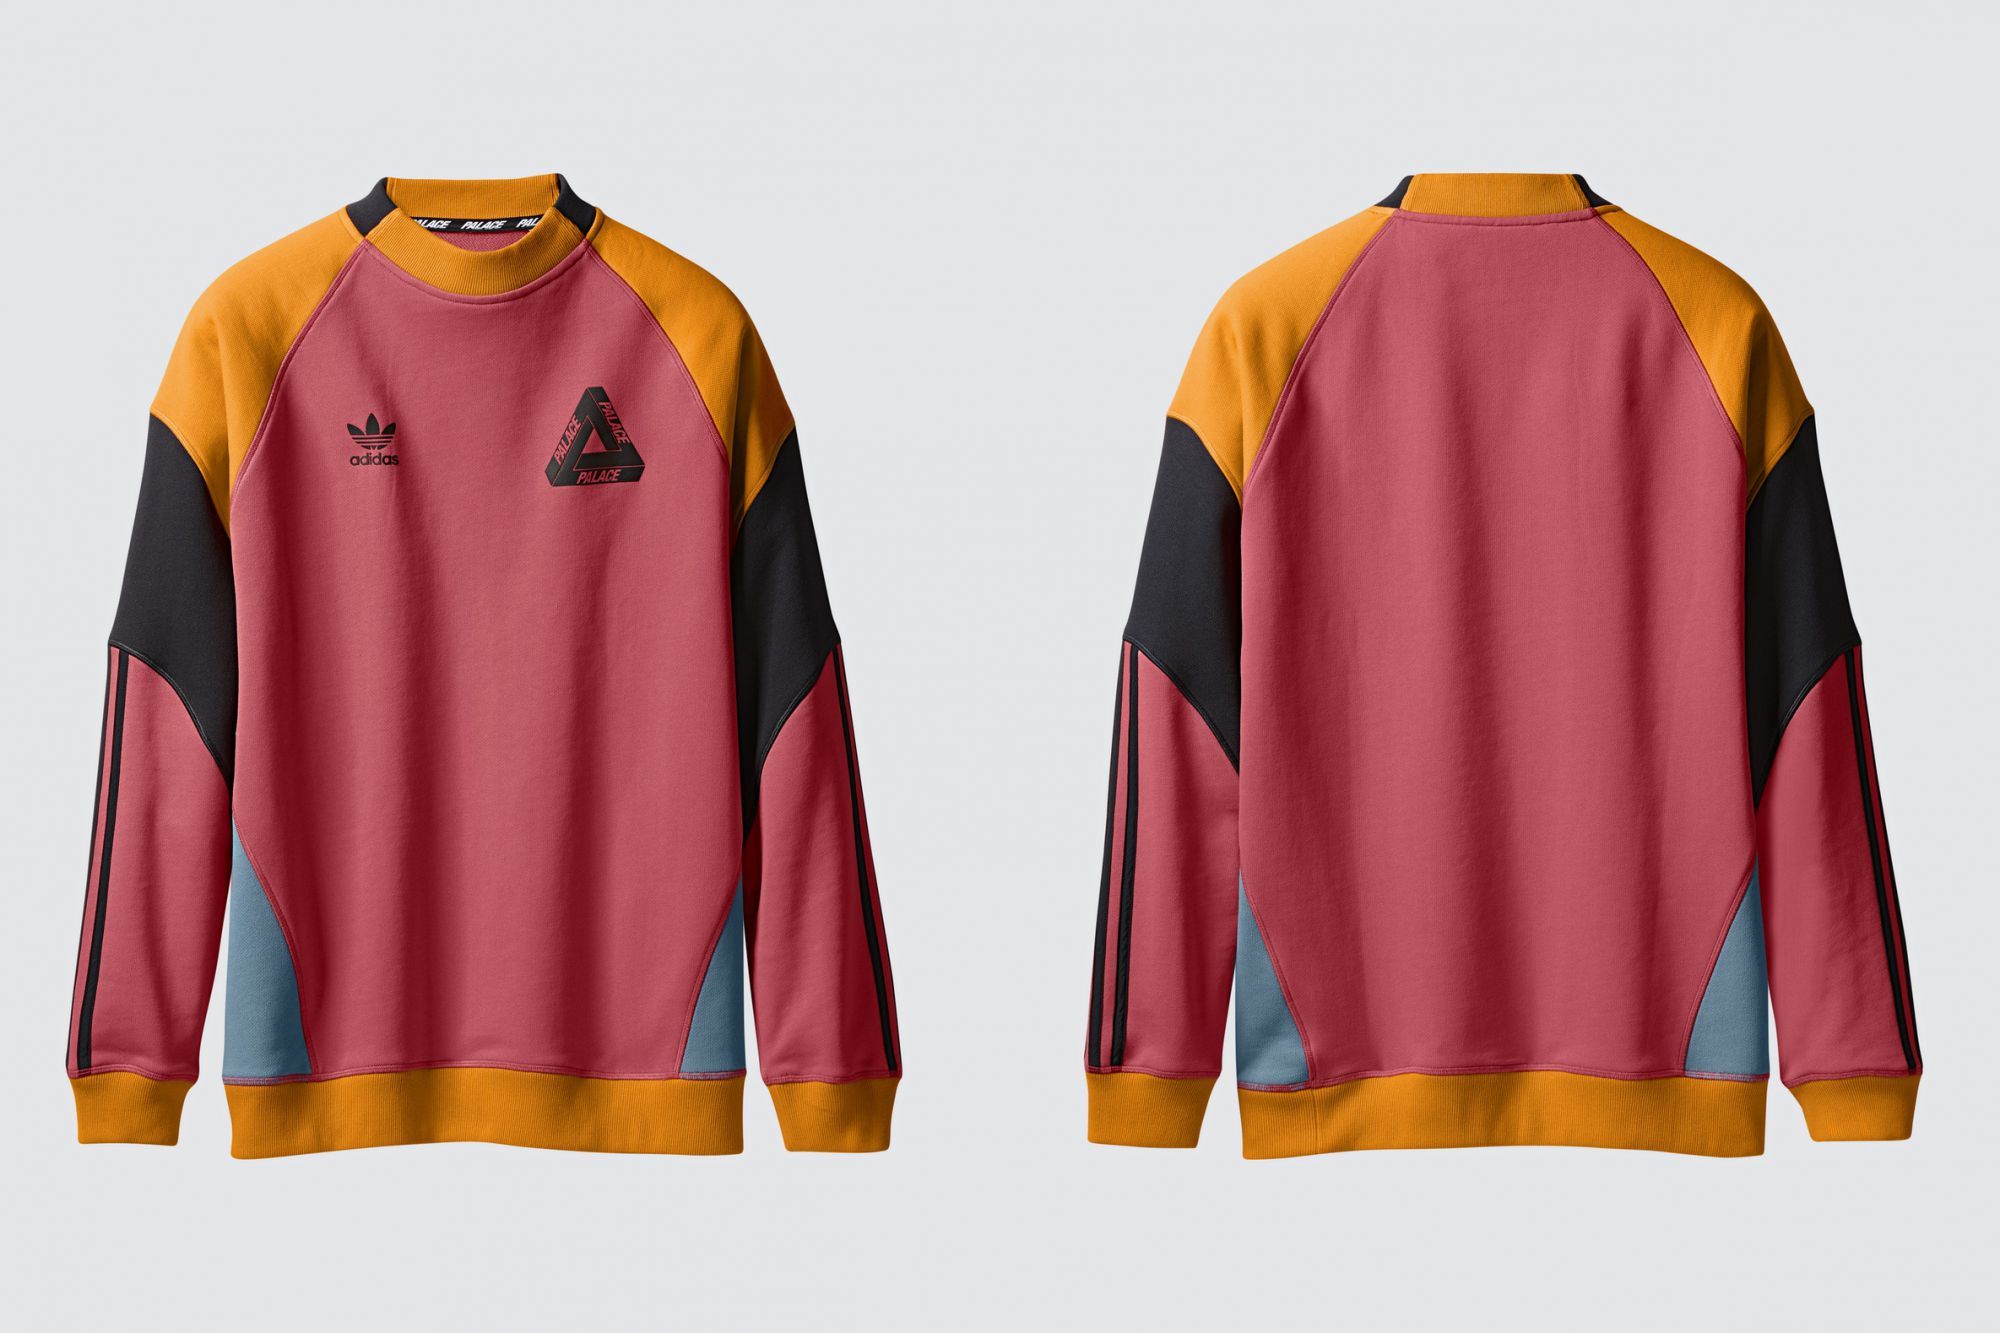 This week will be available the second drop by adidas Originals and Palace